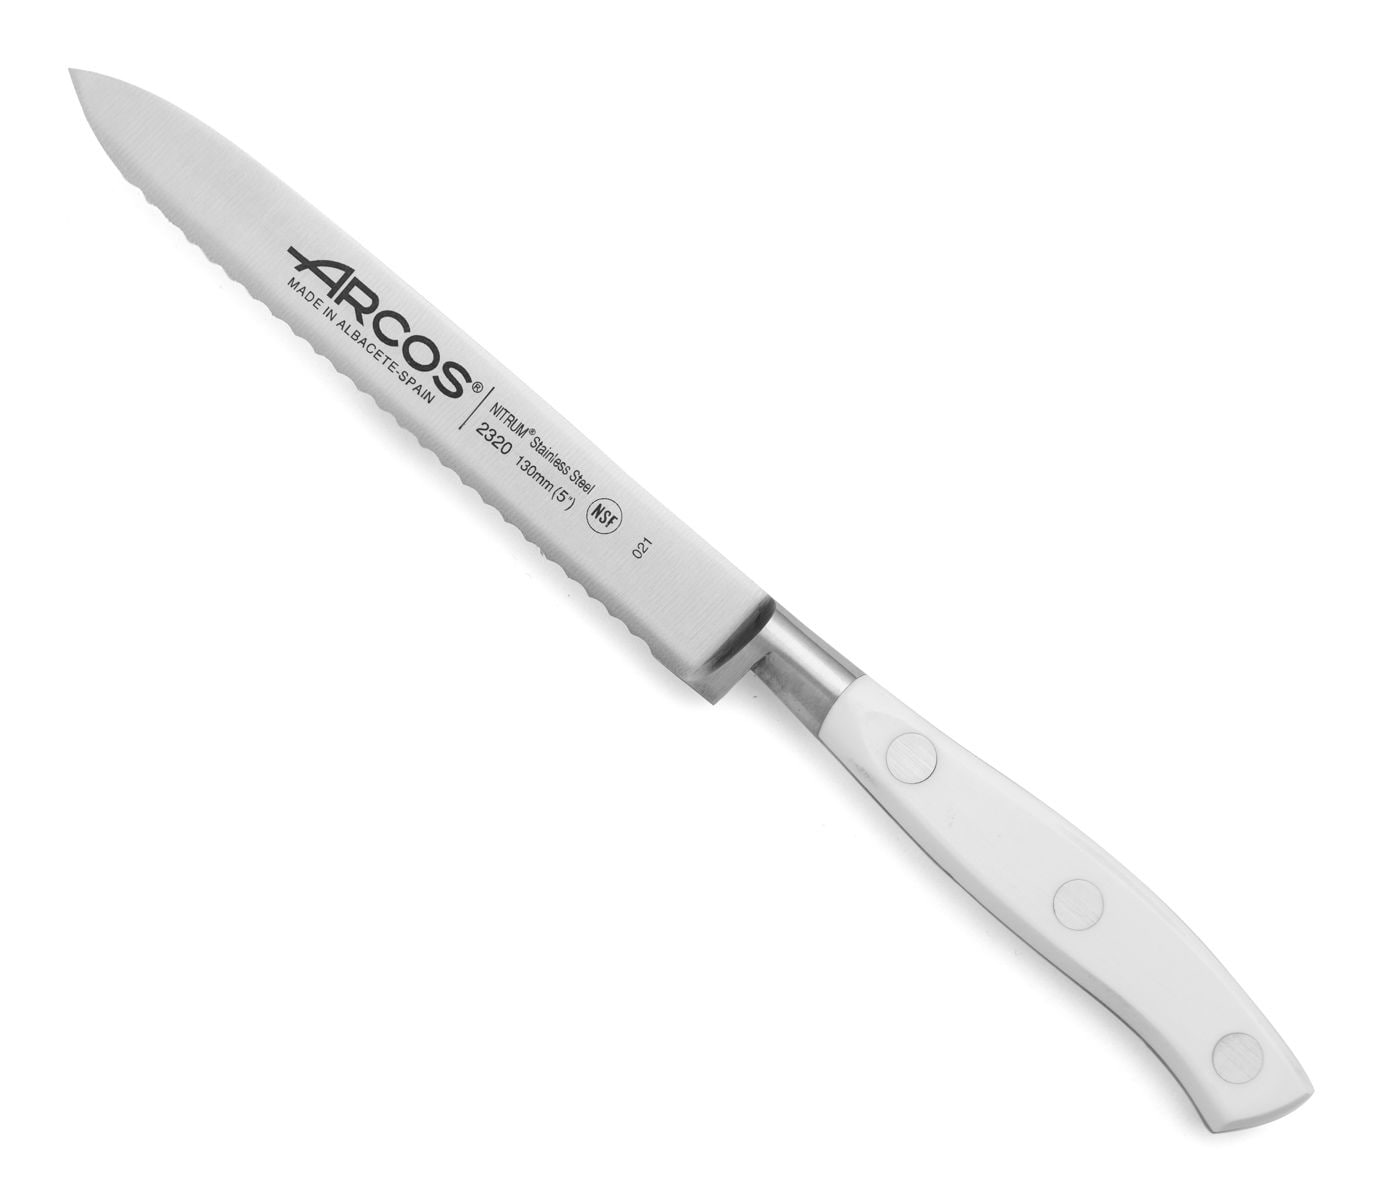 ARCOS Forged Tomato Knife Serrated 5 Inch Nitrum Stainless Steel. Micarta  Handle & Special Silk Edge and Silver Blade 130 mm blade. Series Brooklyn.